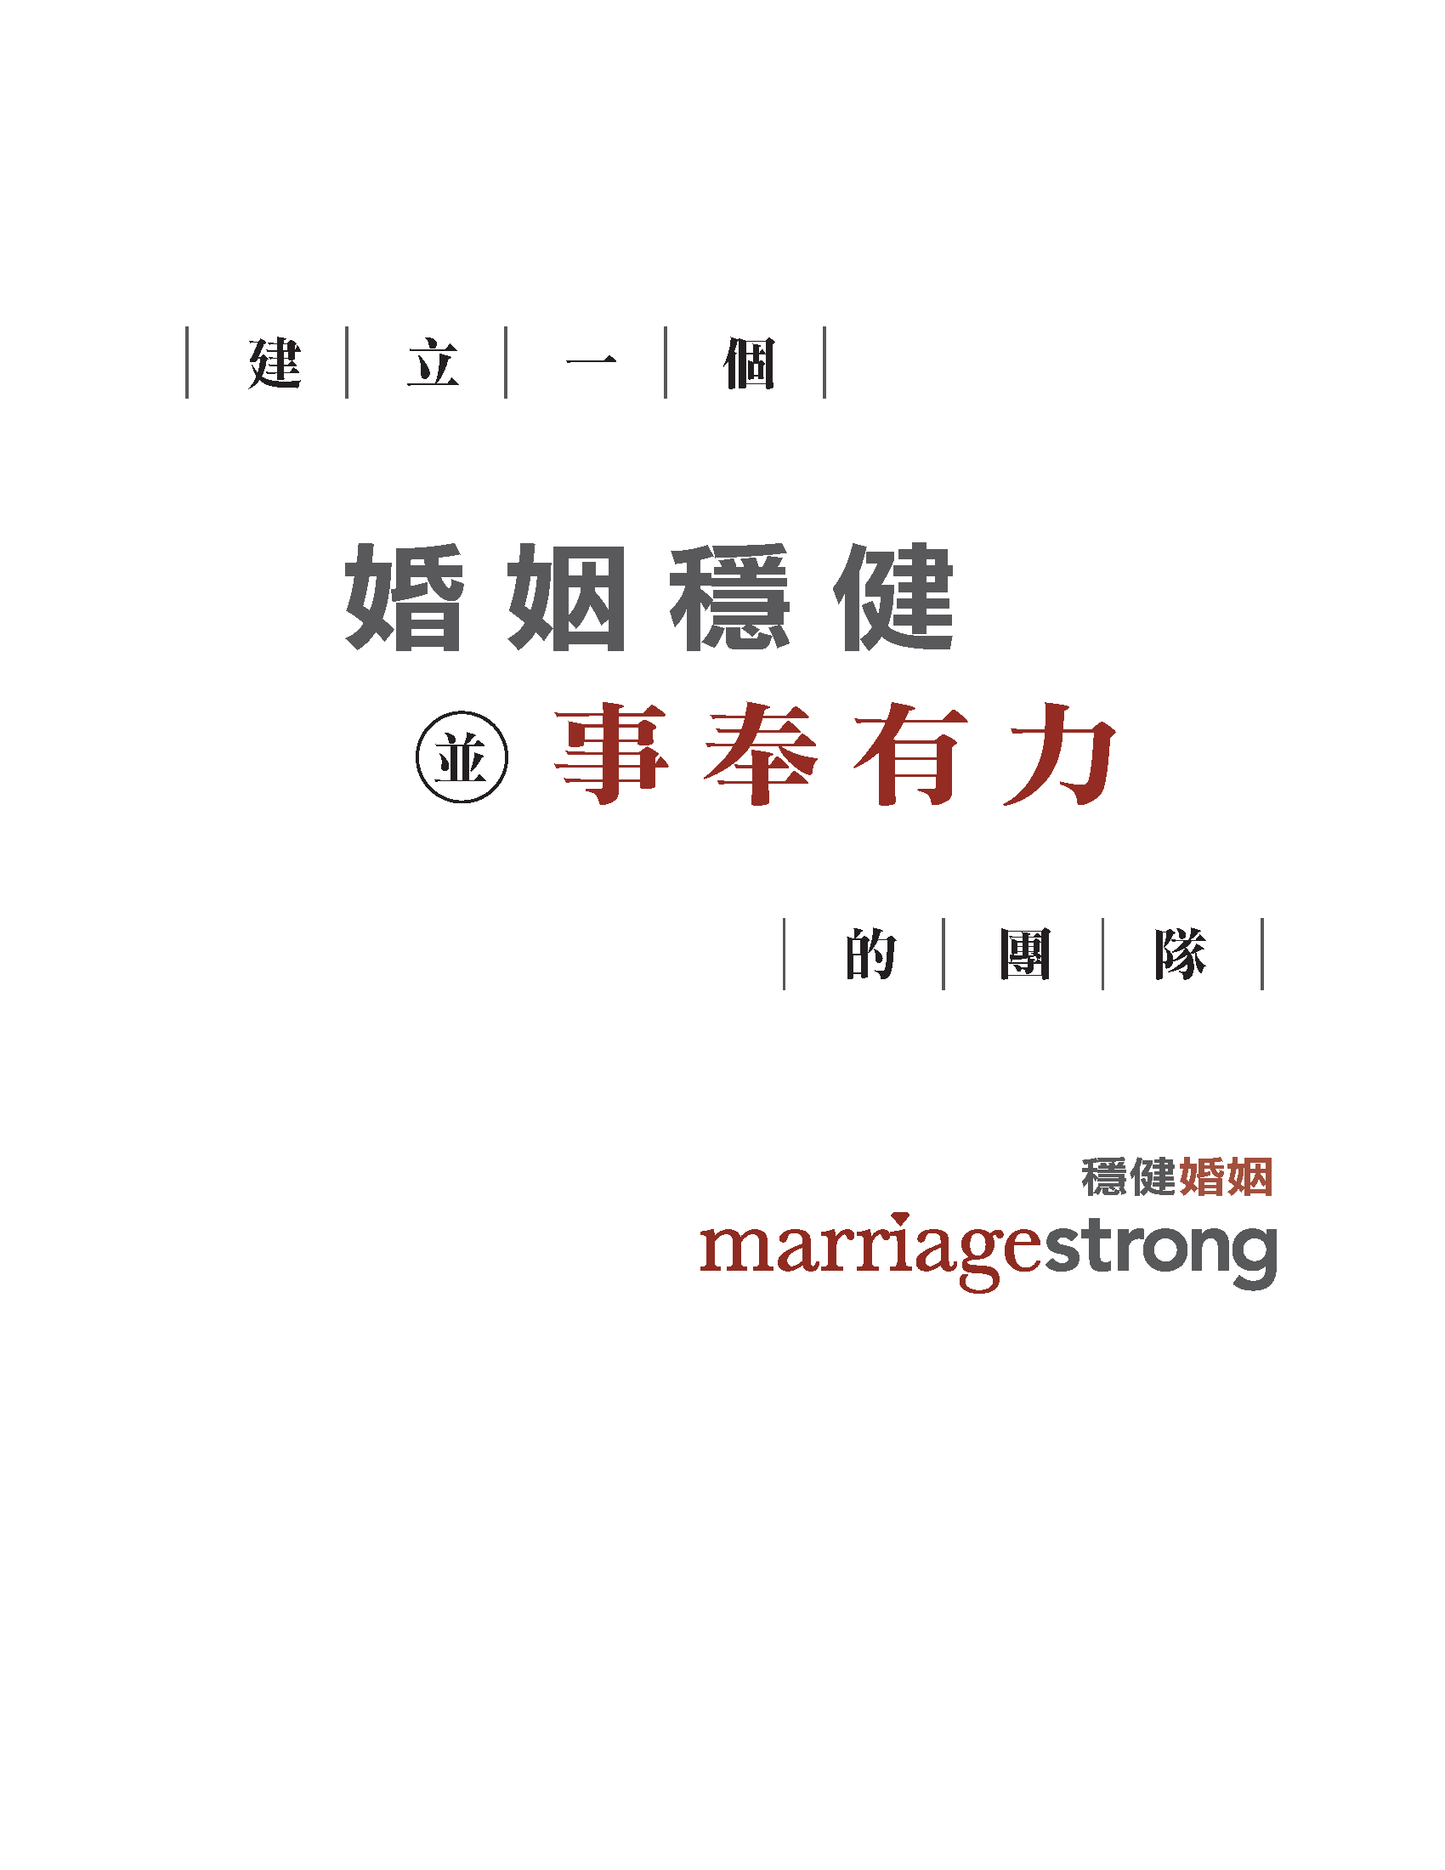 LEADER GUIDE - MarriageStrong for Couples (Spanish, Korean, & Chinese)